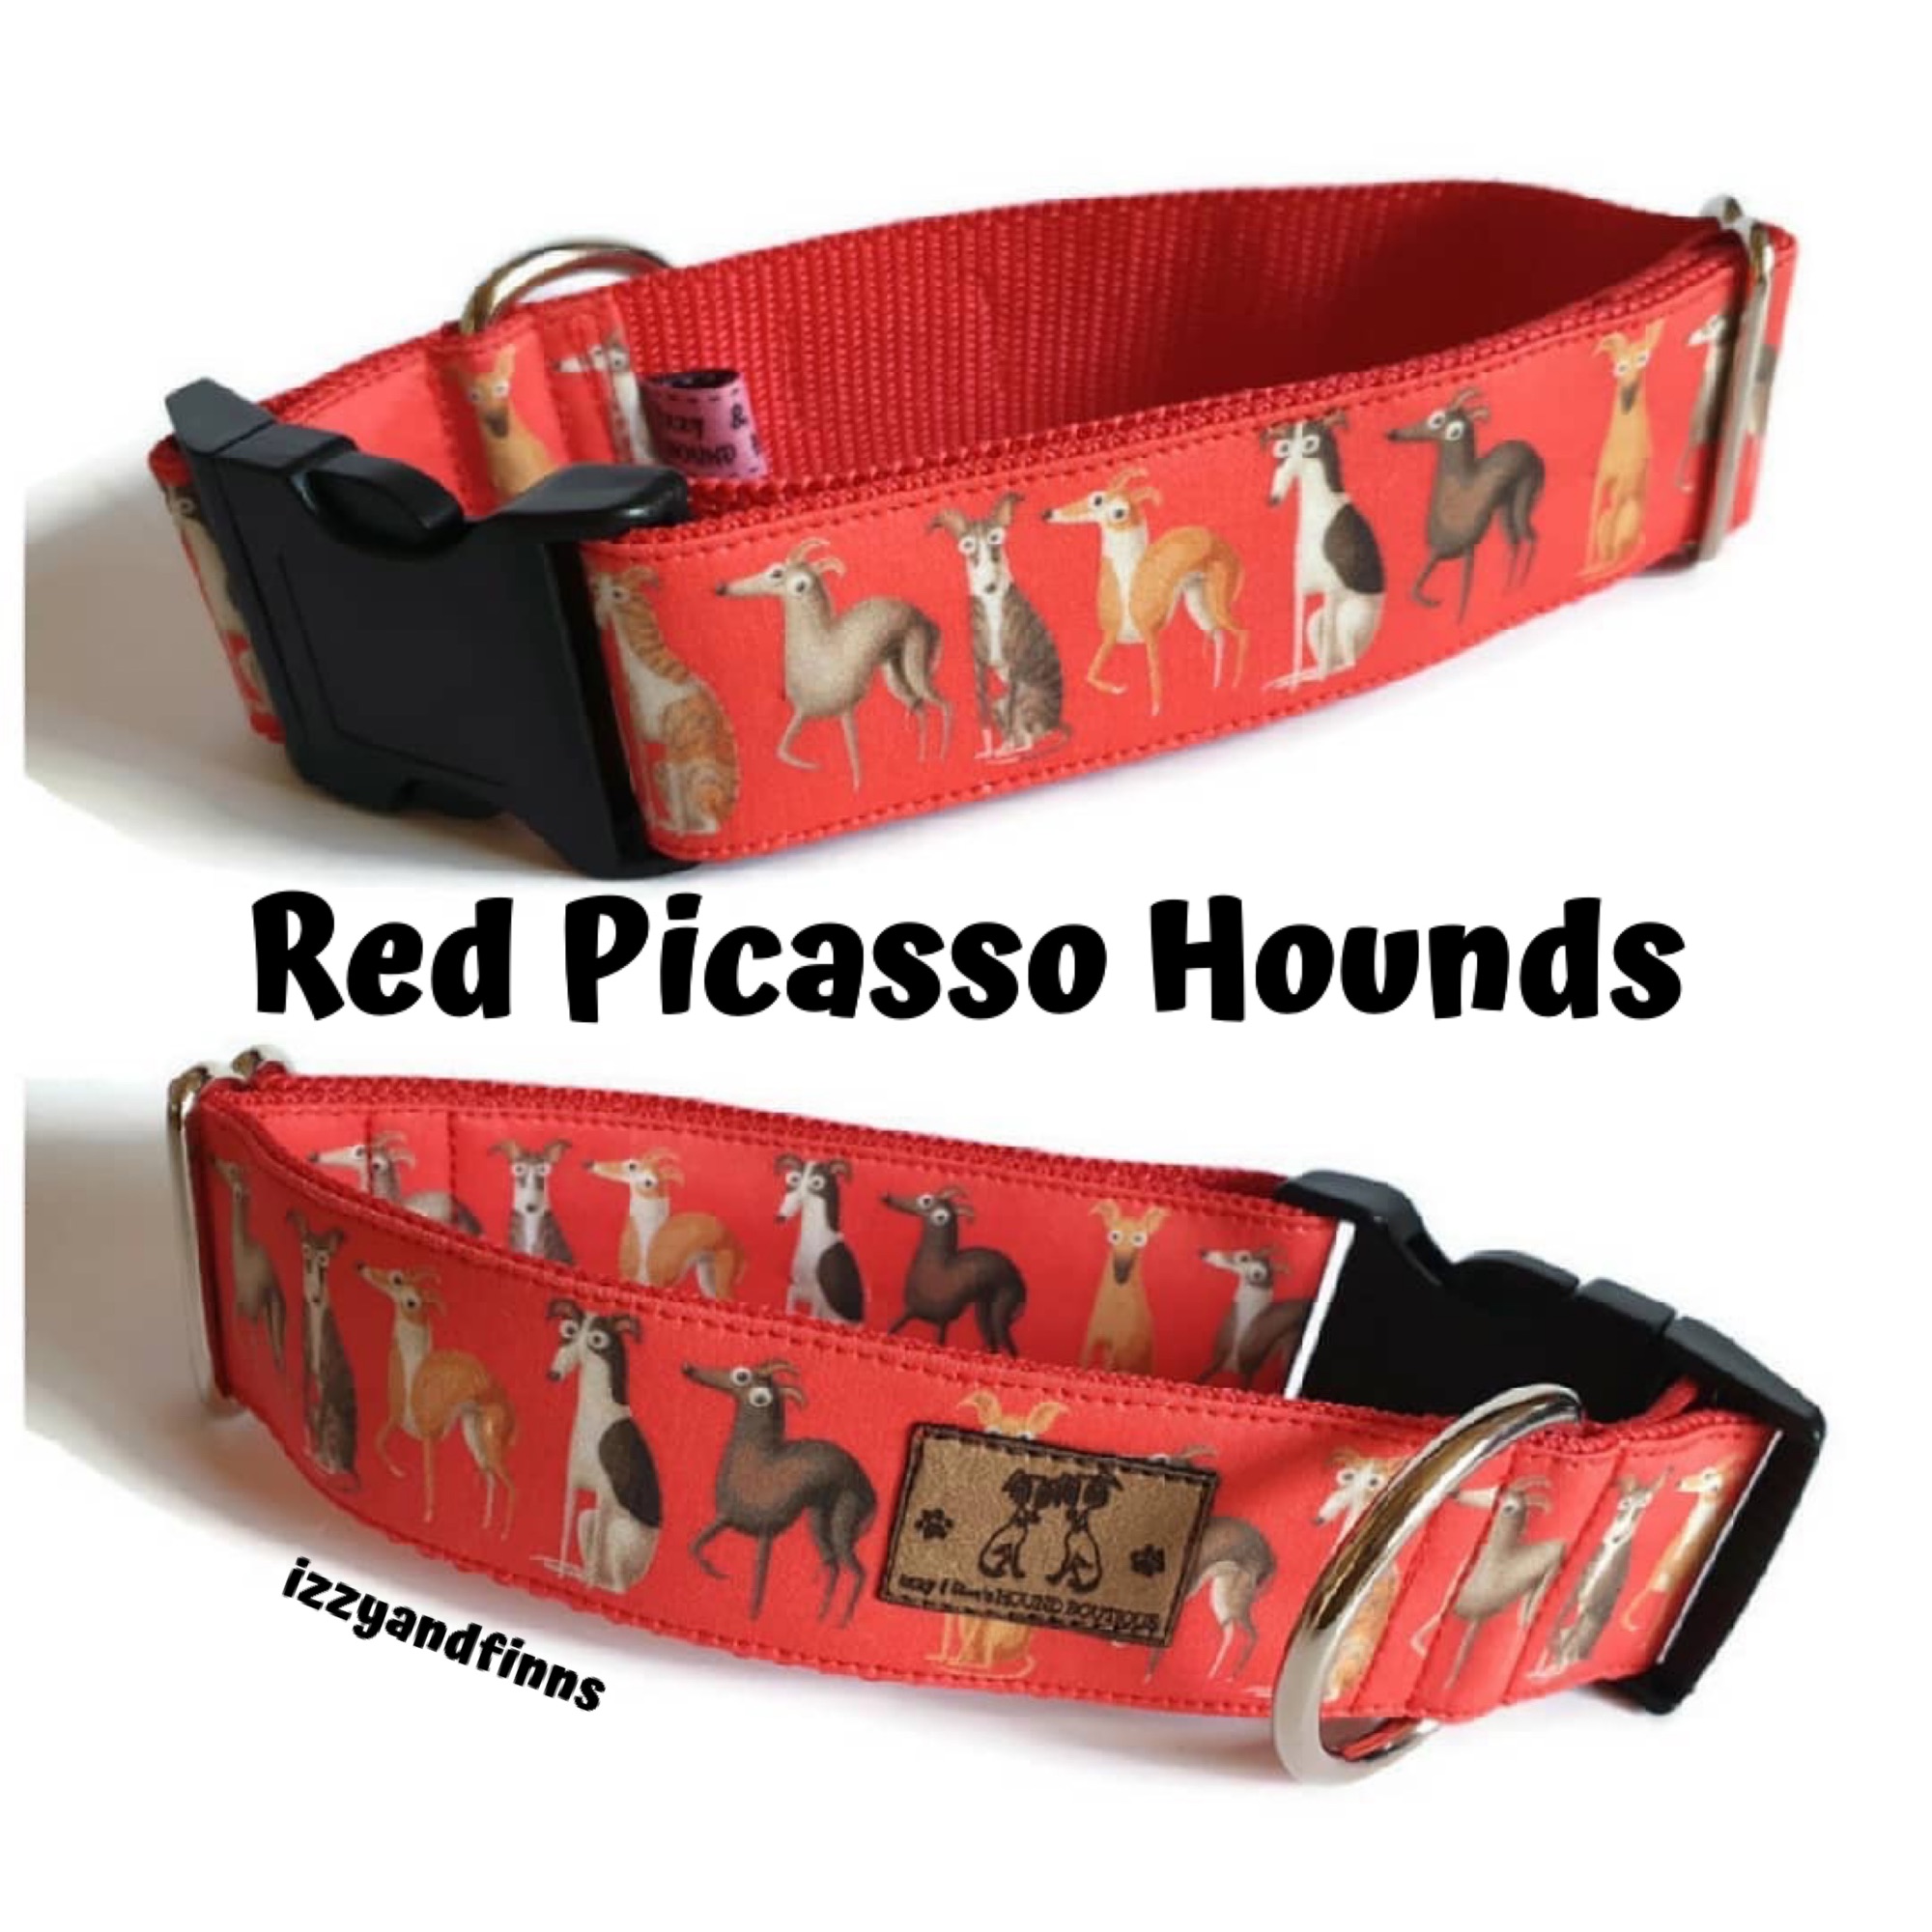 Red Picasso Hounds